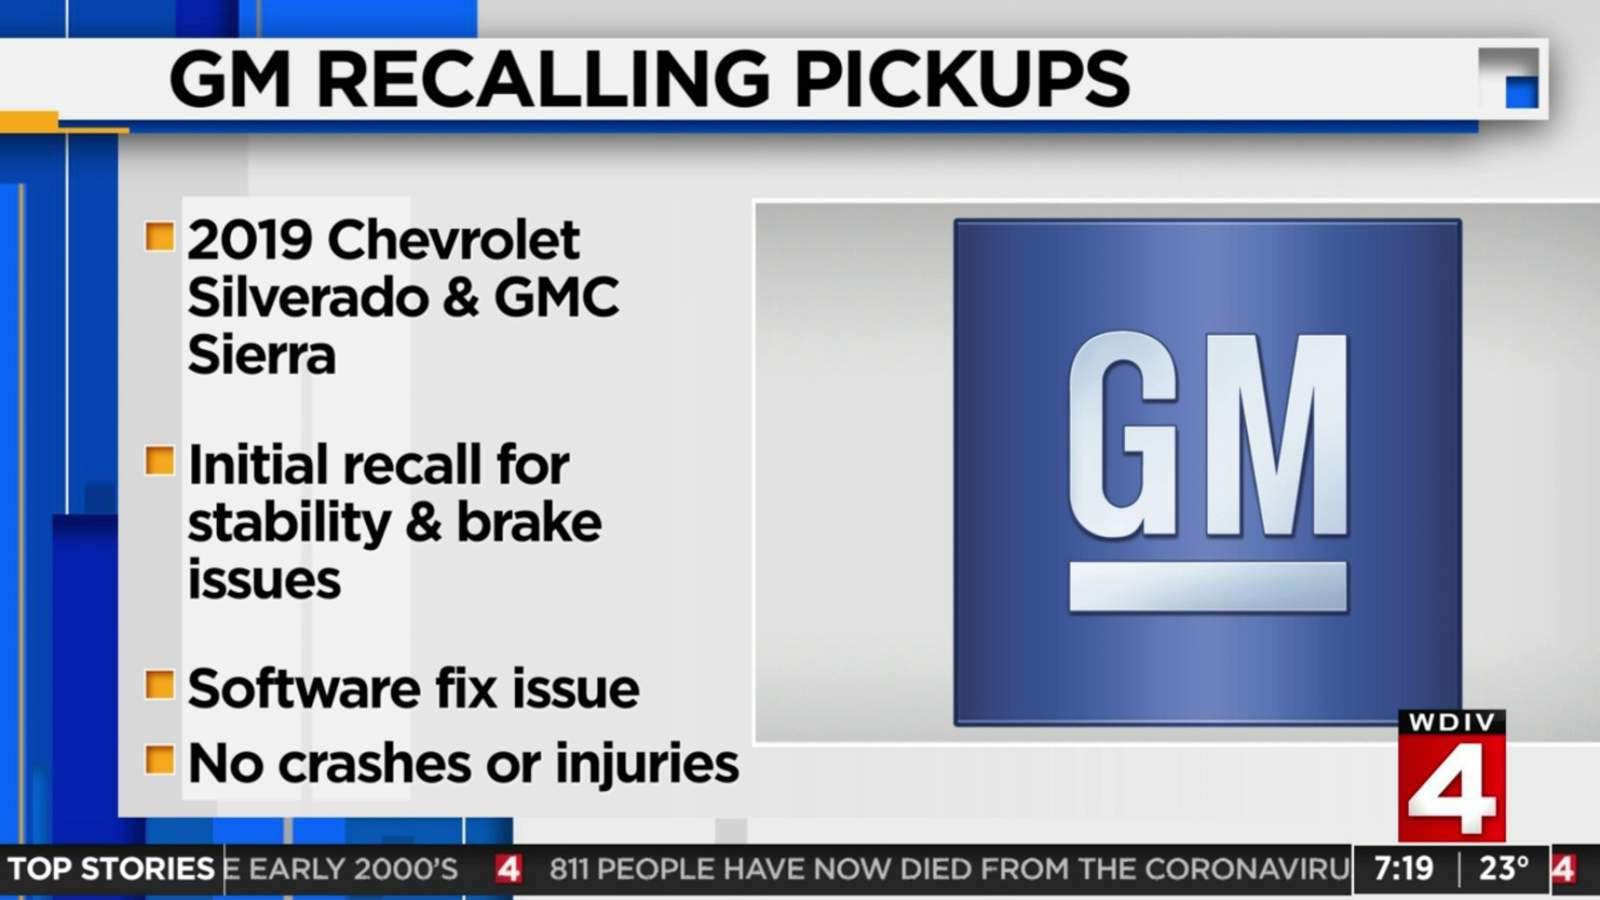 GM issues recall for its most popular brands